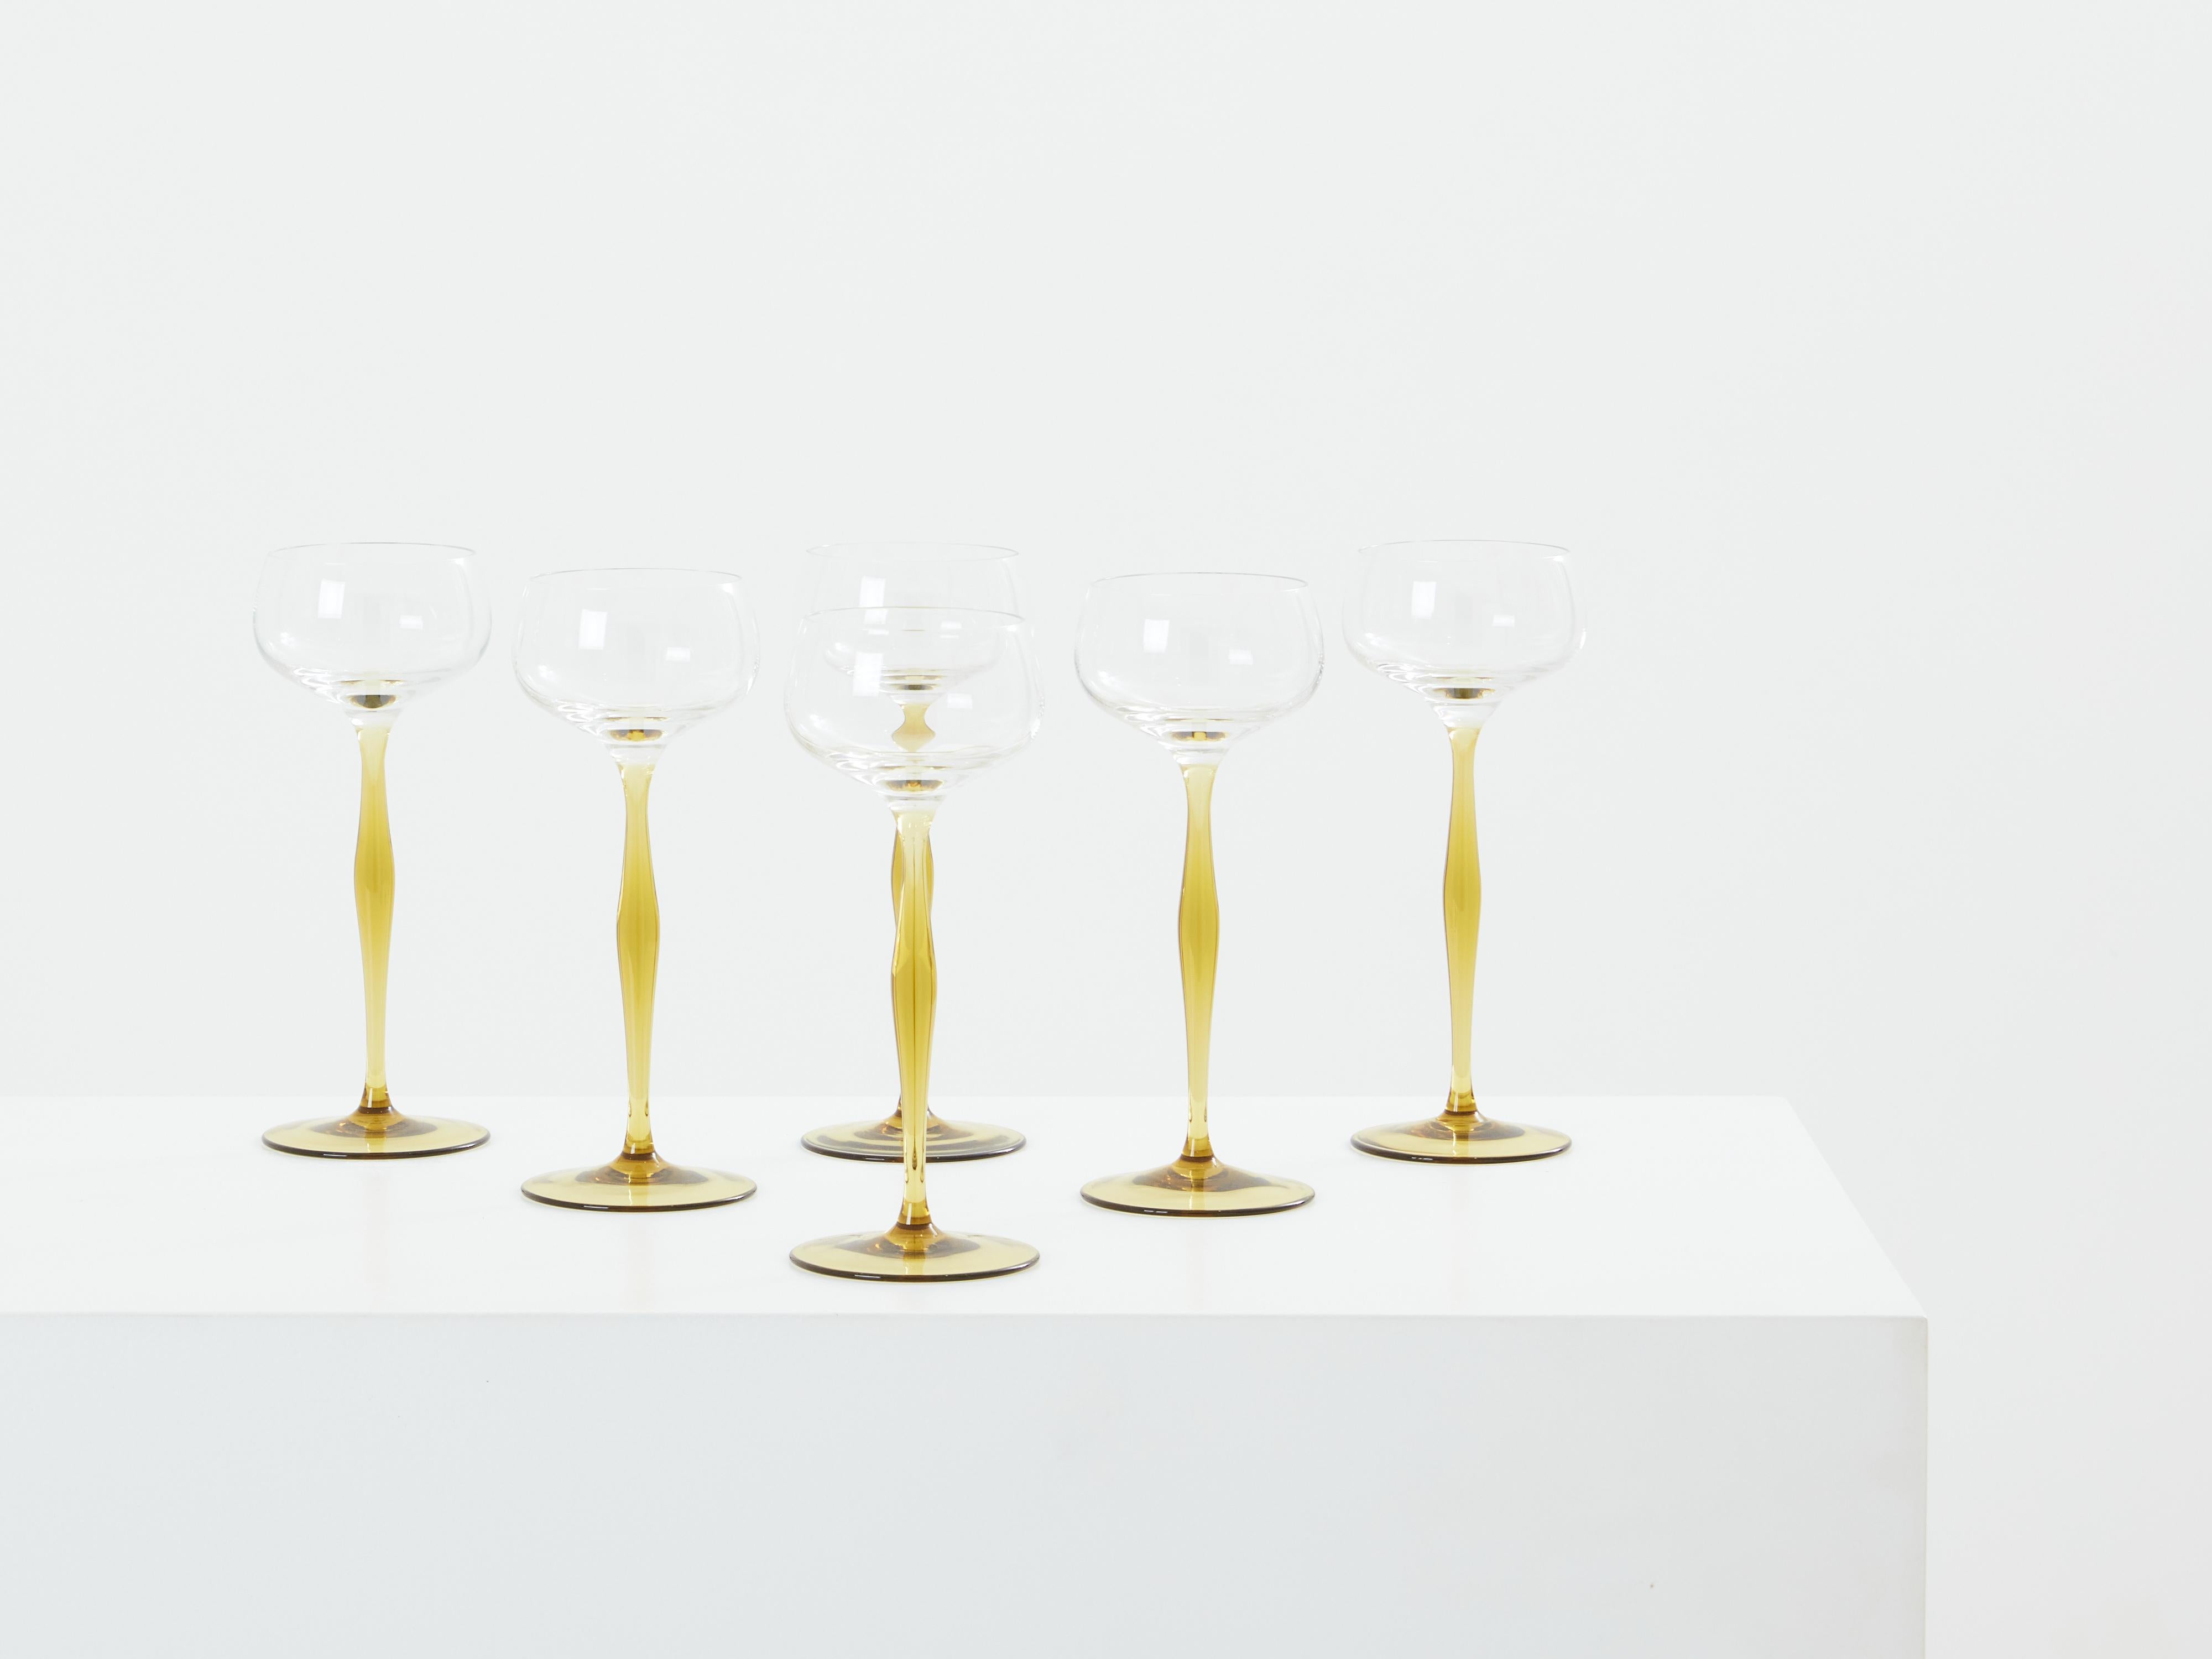 This set of six champagne glasses, designed by Peter Behrens for Benedikt von Poschinger, dating back to 1898, embodies a skillful blend of innovation and aesthetics. Each glass features a domed bowl of transparent glass mounted on a long stem of